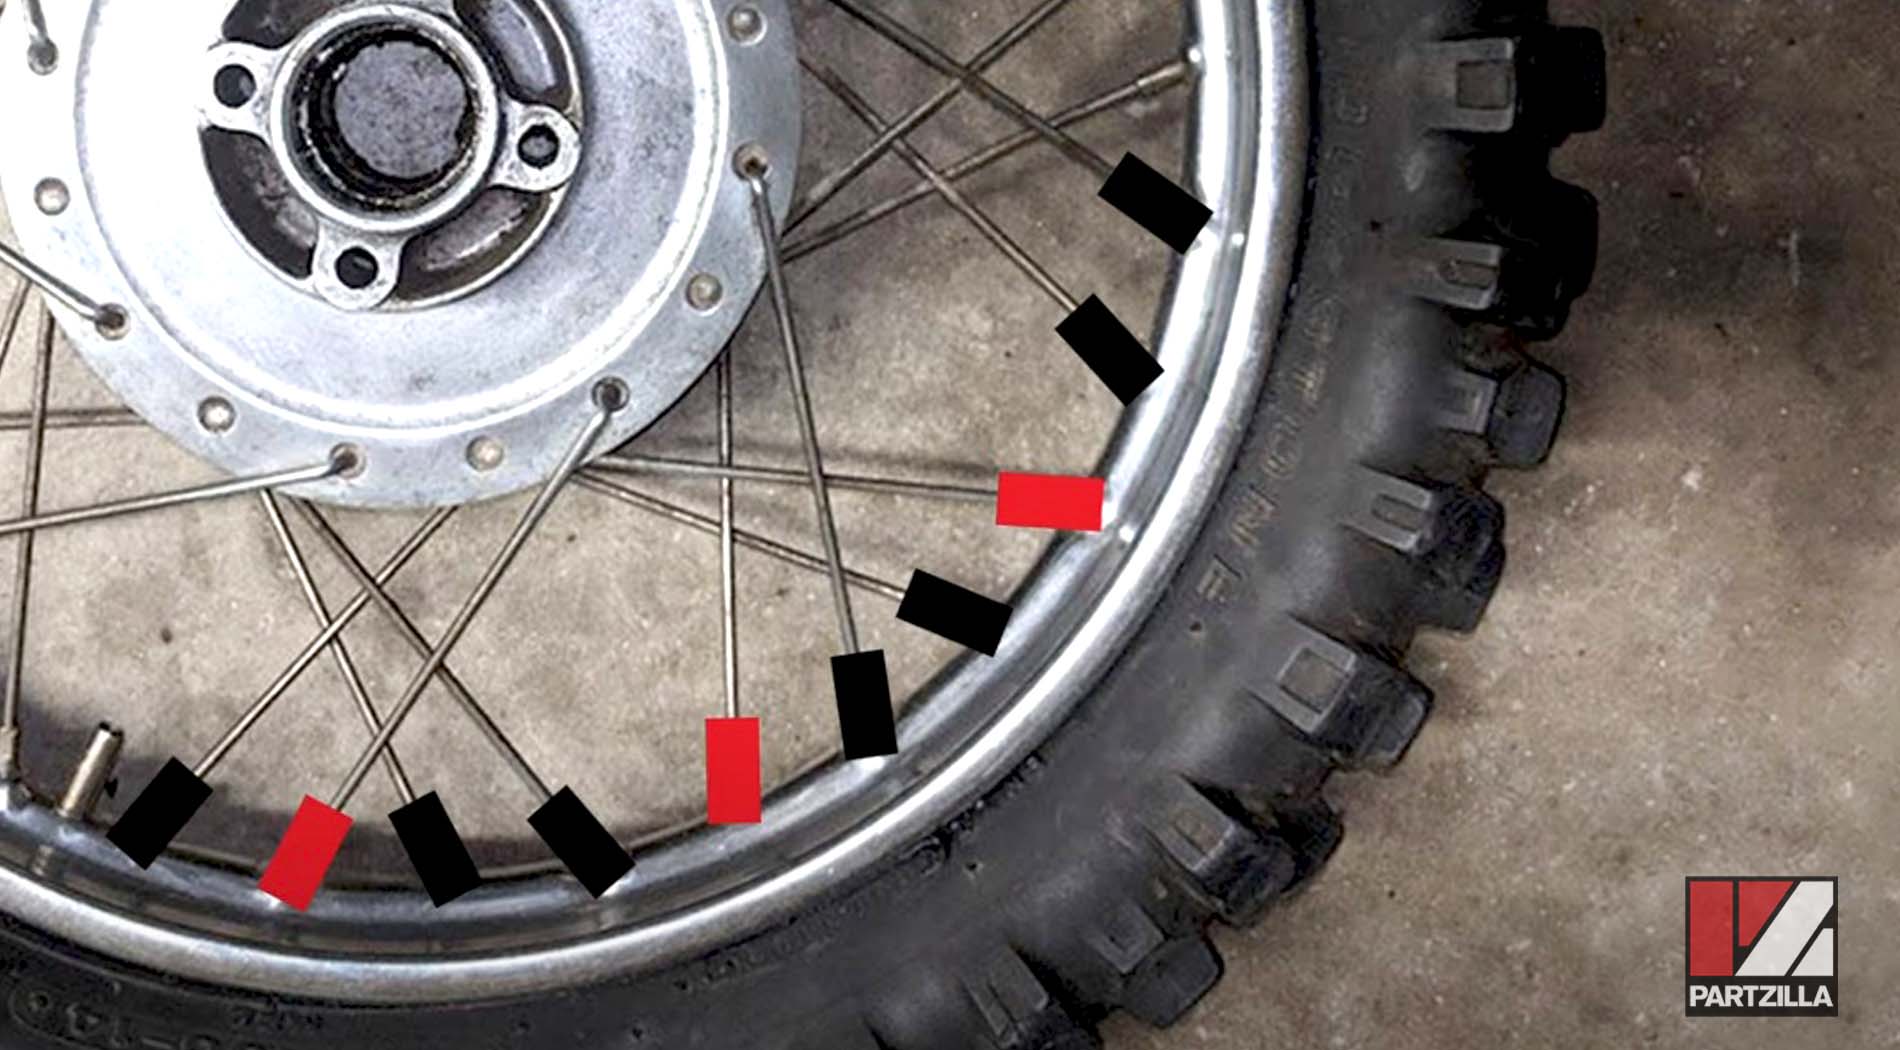 How to true a motorcycle wheel spokes